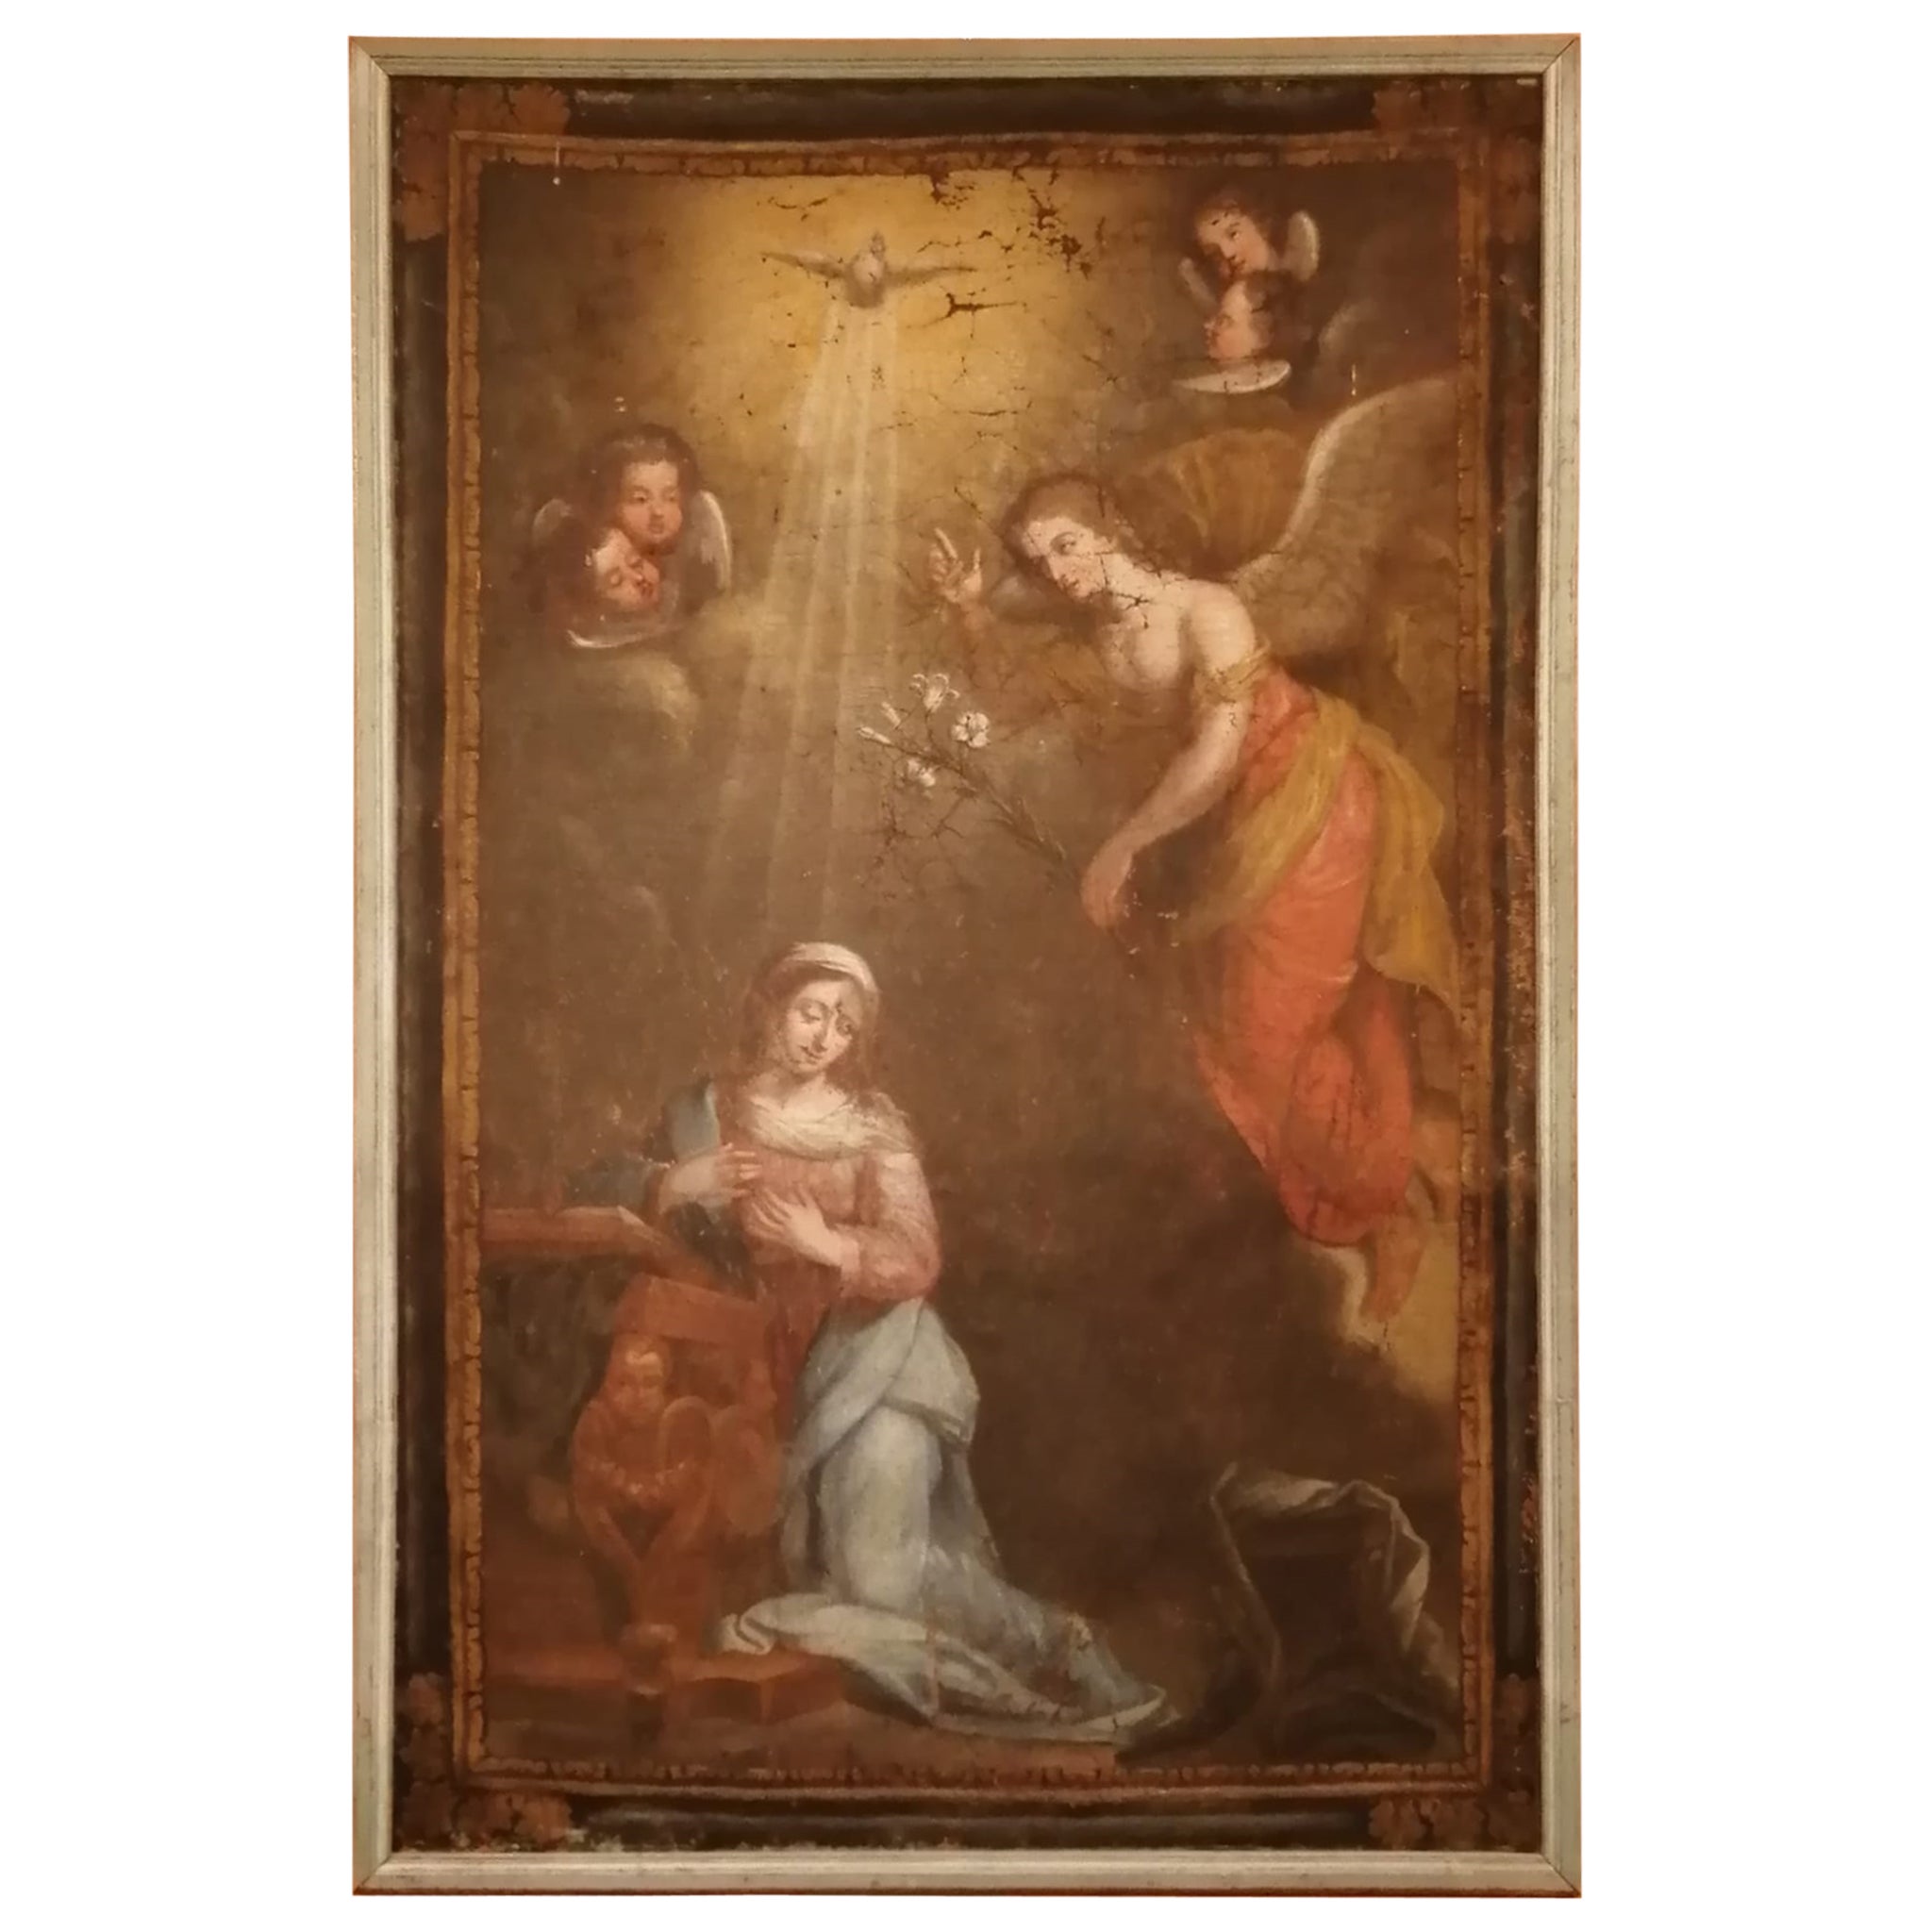 Antique Painting "the Annunciation" Italian, Bologna, 17th Century